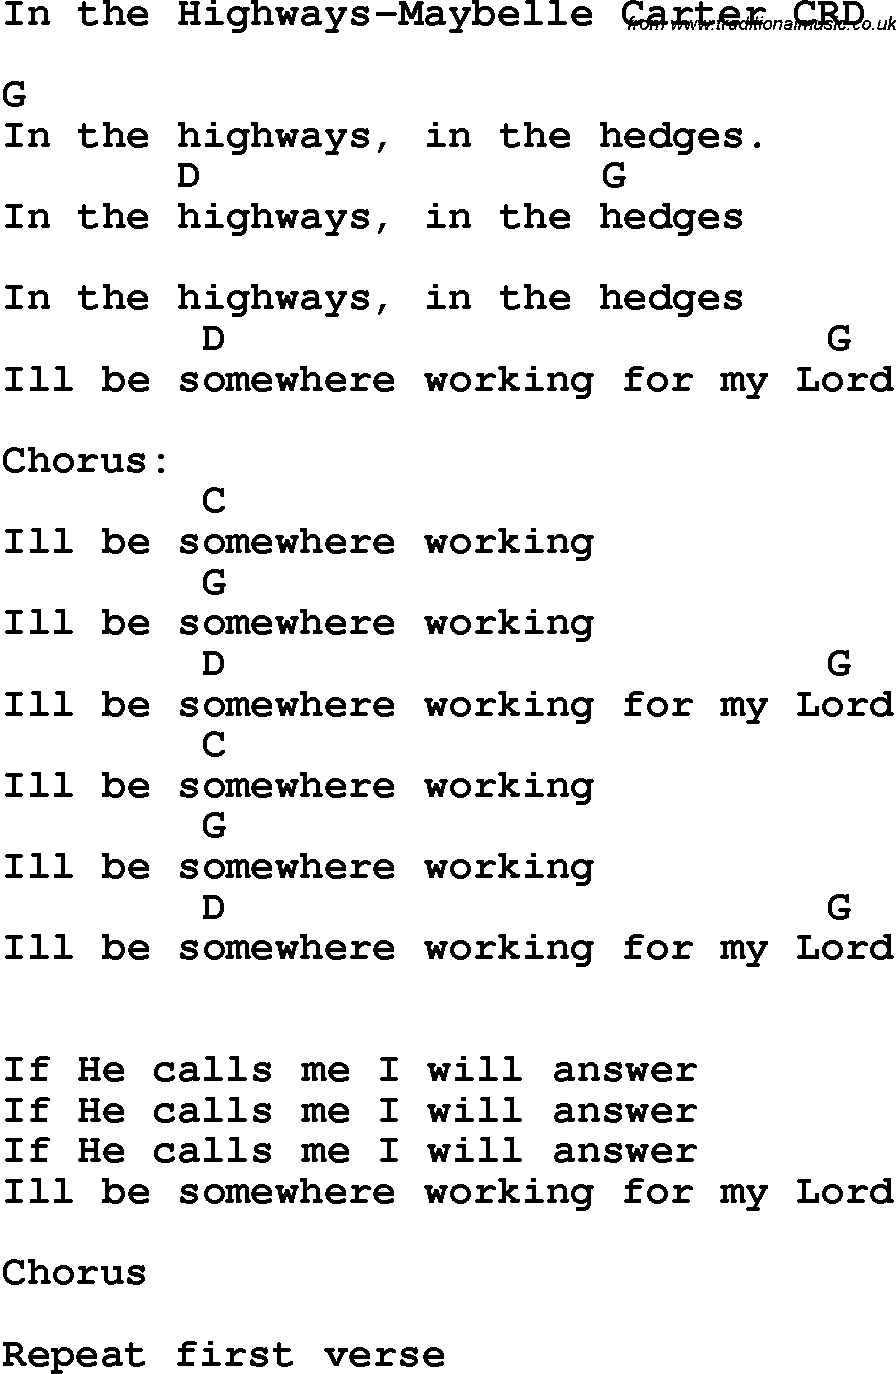 Christian Chlidrens Song In The Highways-Maybelle Carter CRD Lyrics & Chords